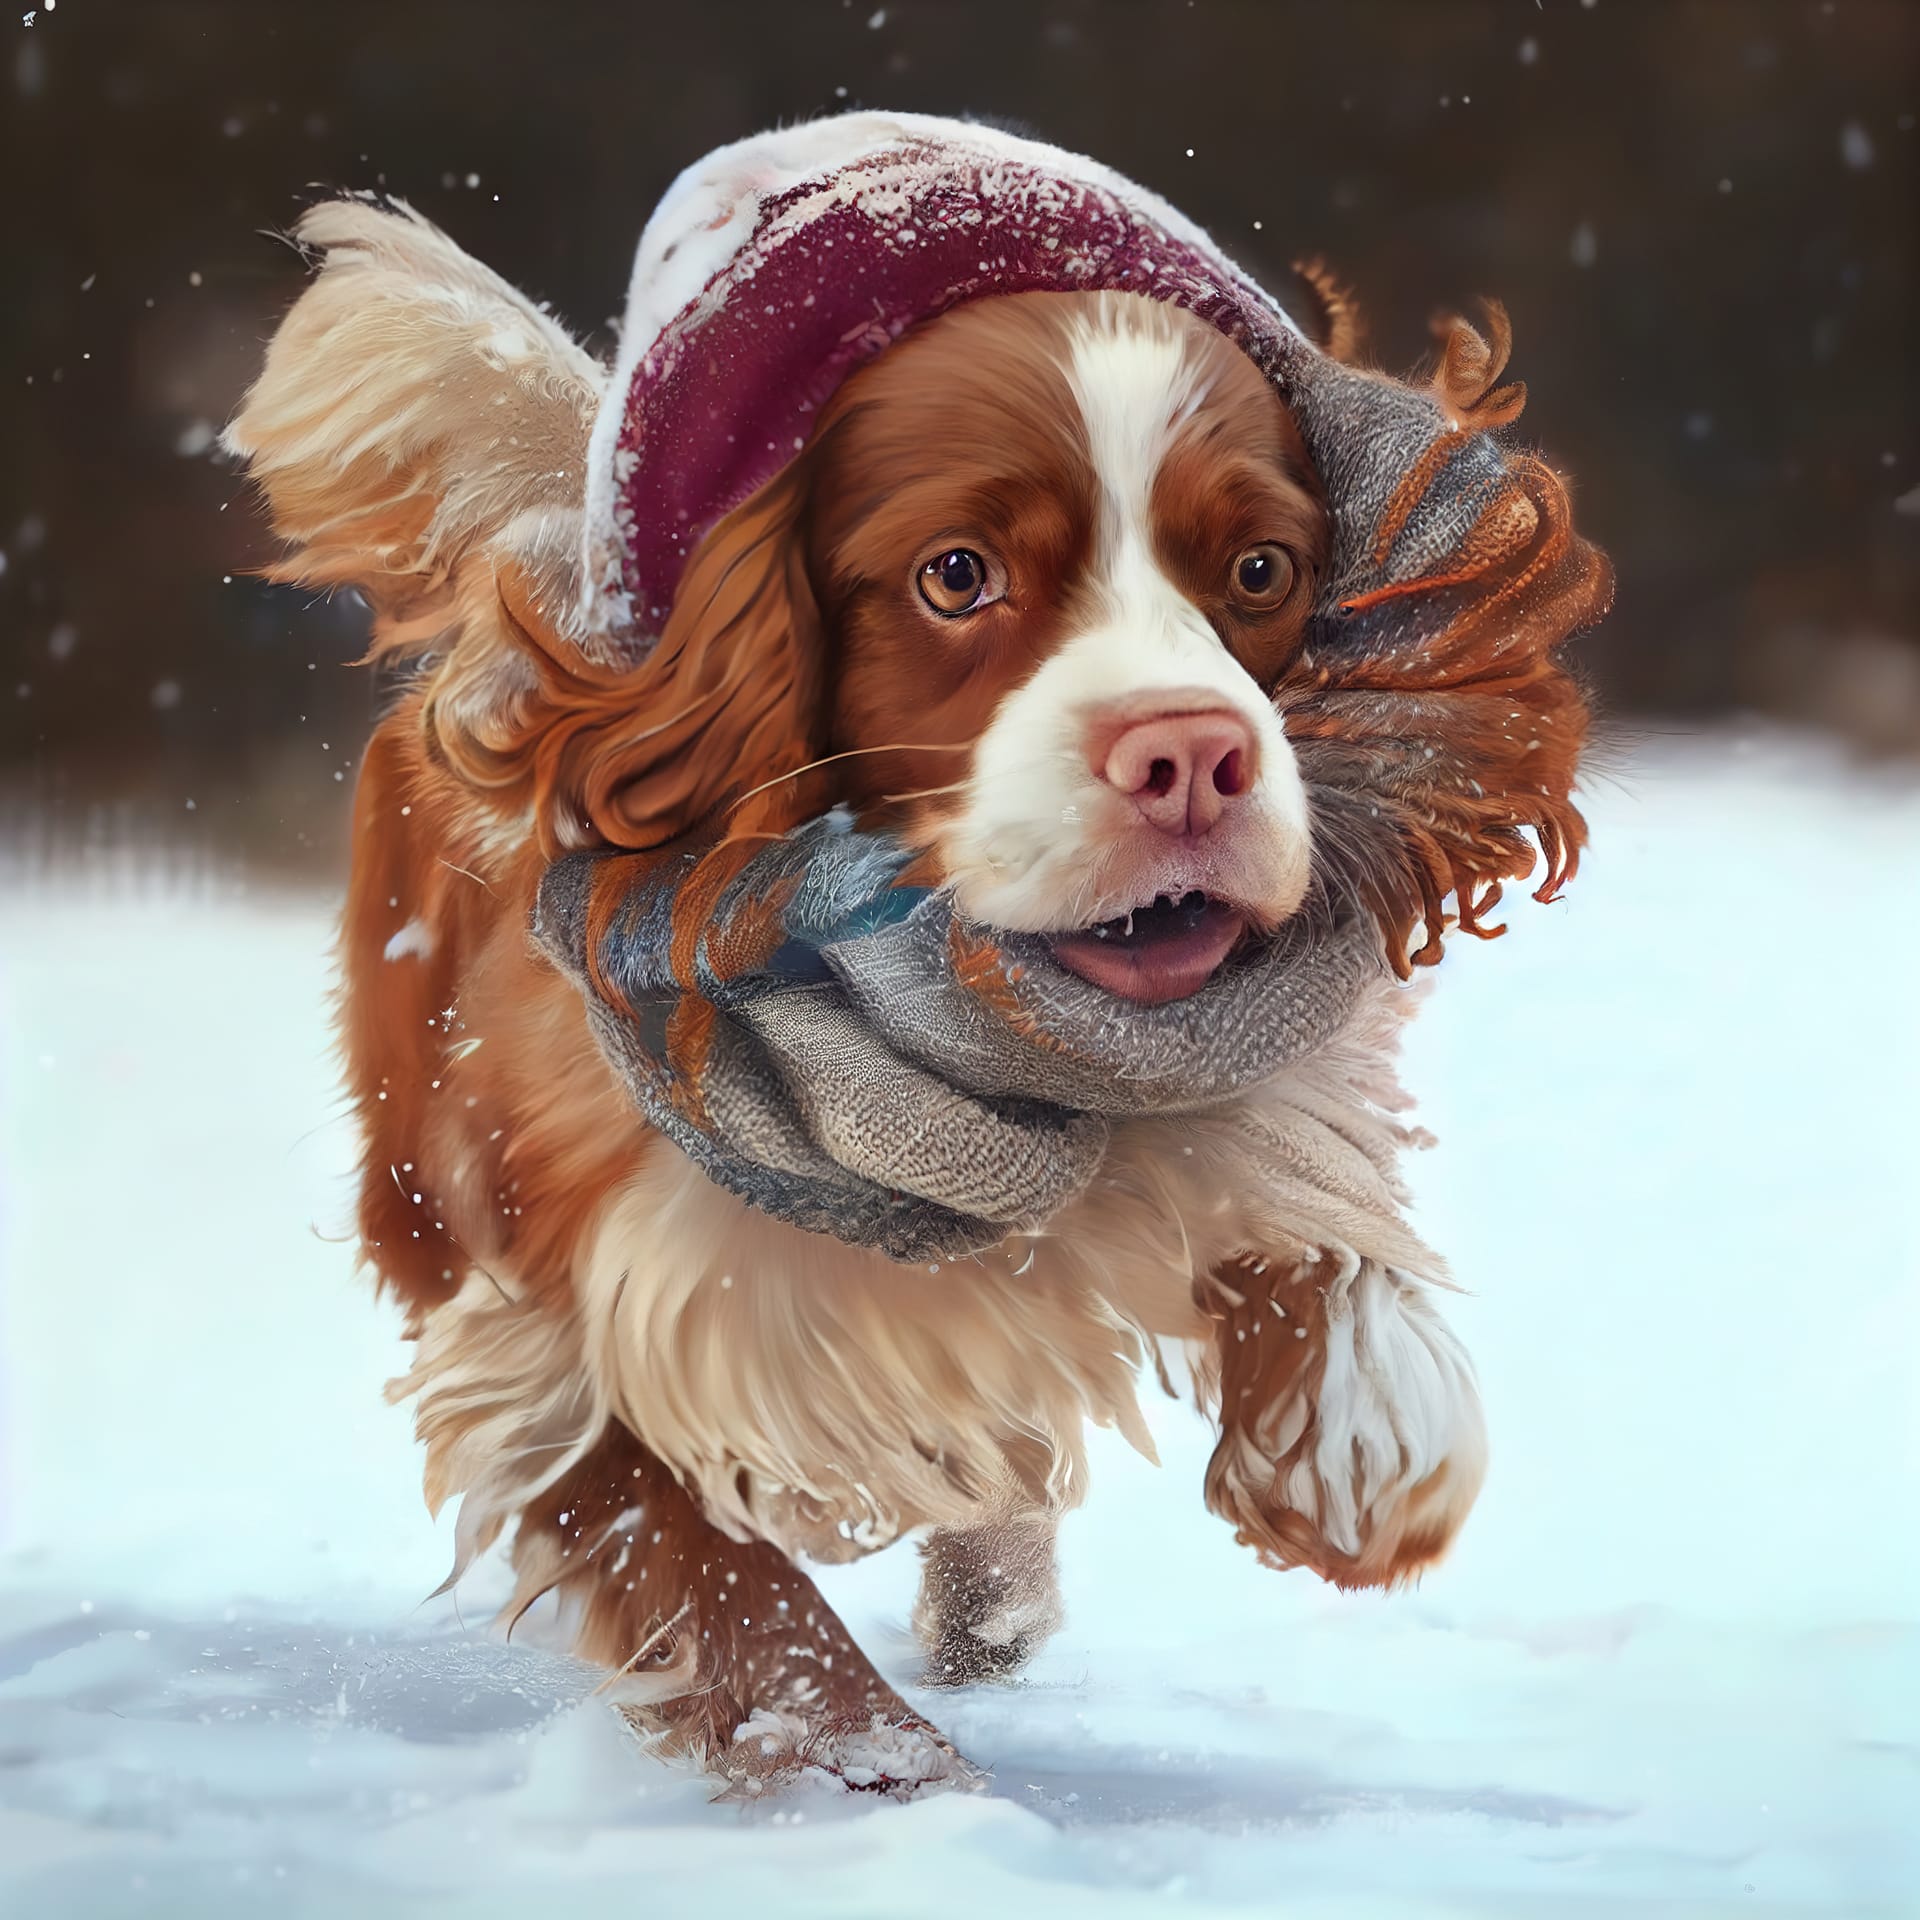 Spaniel dog knitted hat running winter park realistic image